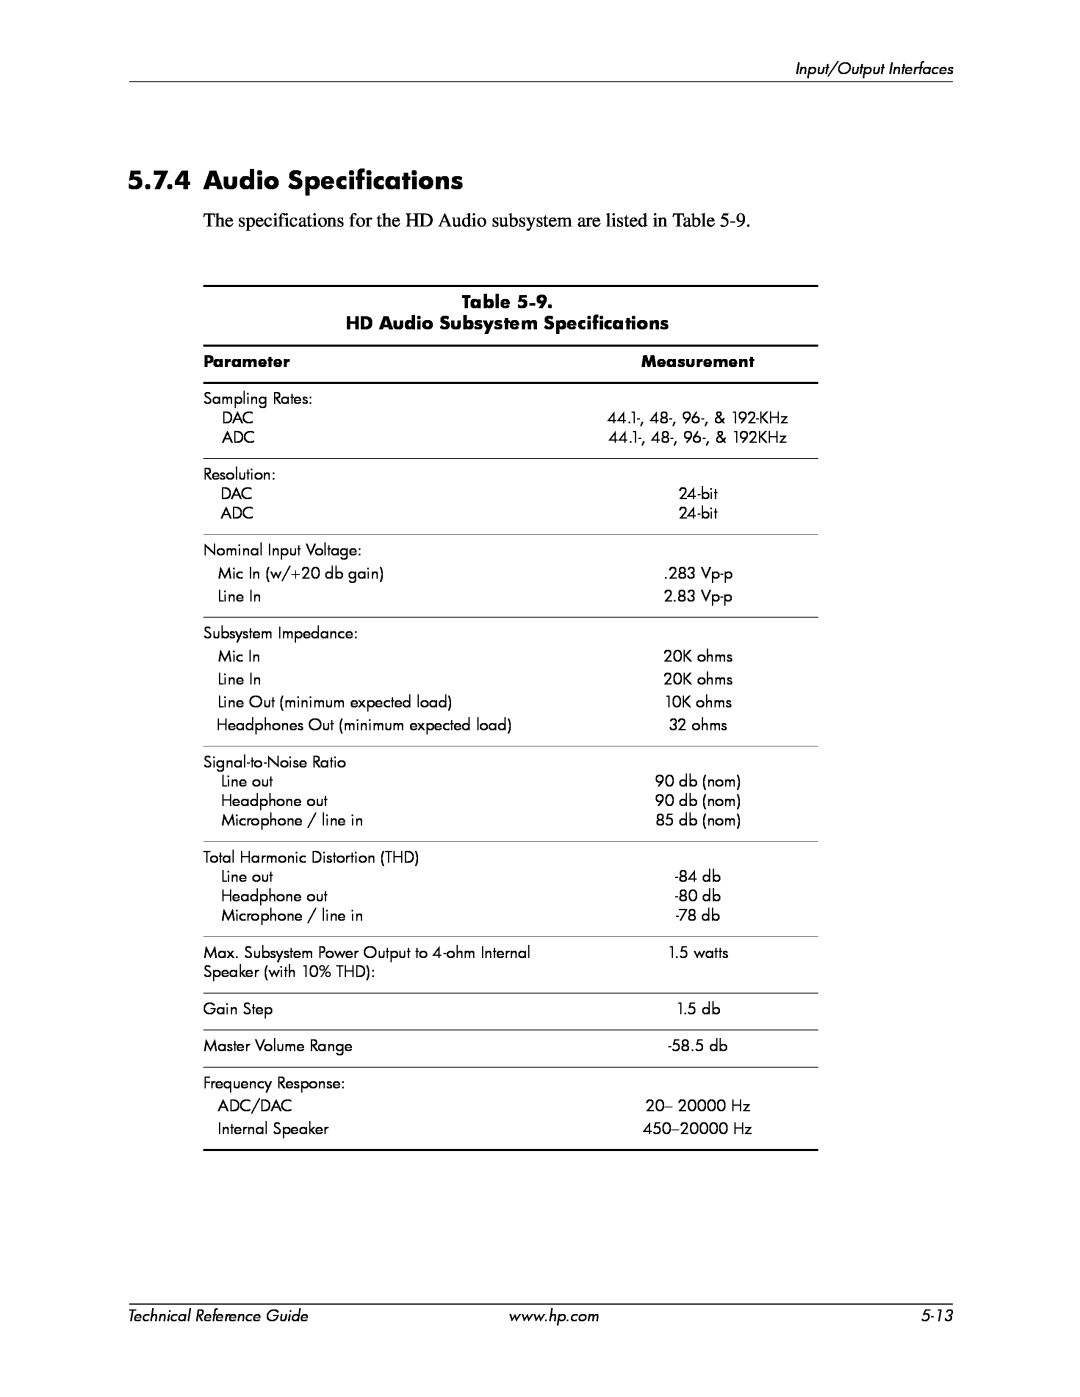 HP 8000 tower manual Audio Specifications, The specifications for the HD Audio subsystem are listed in Table 